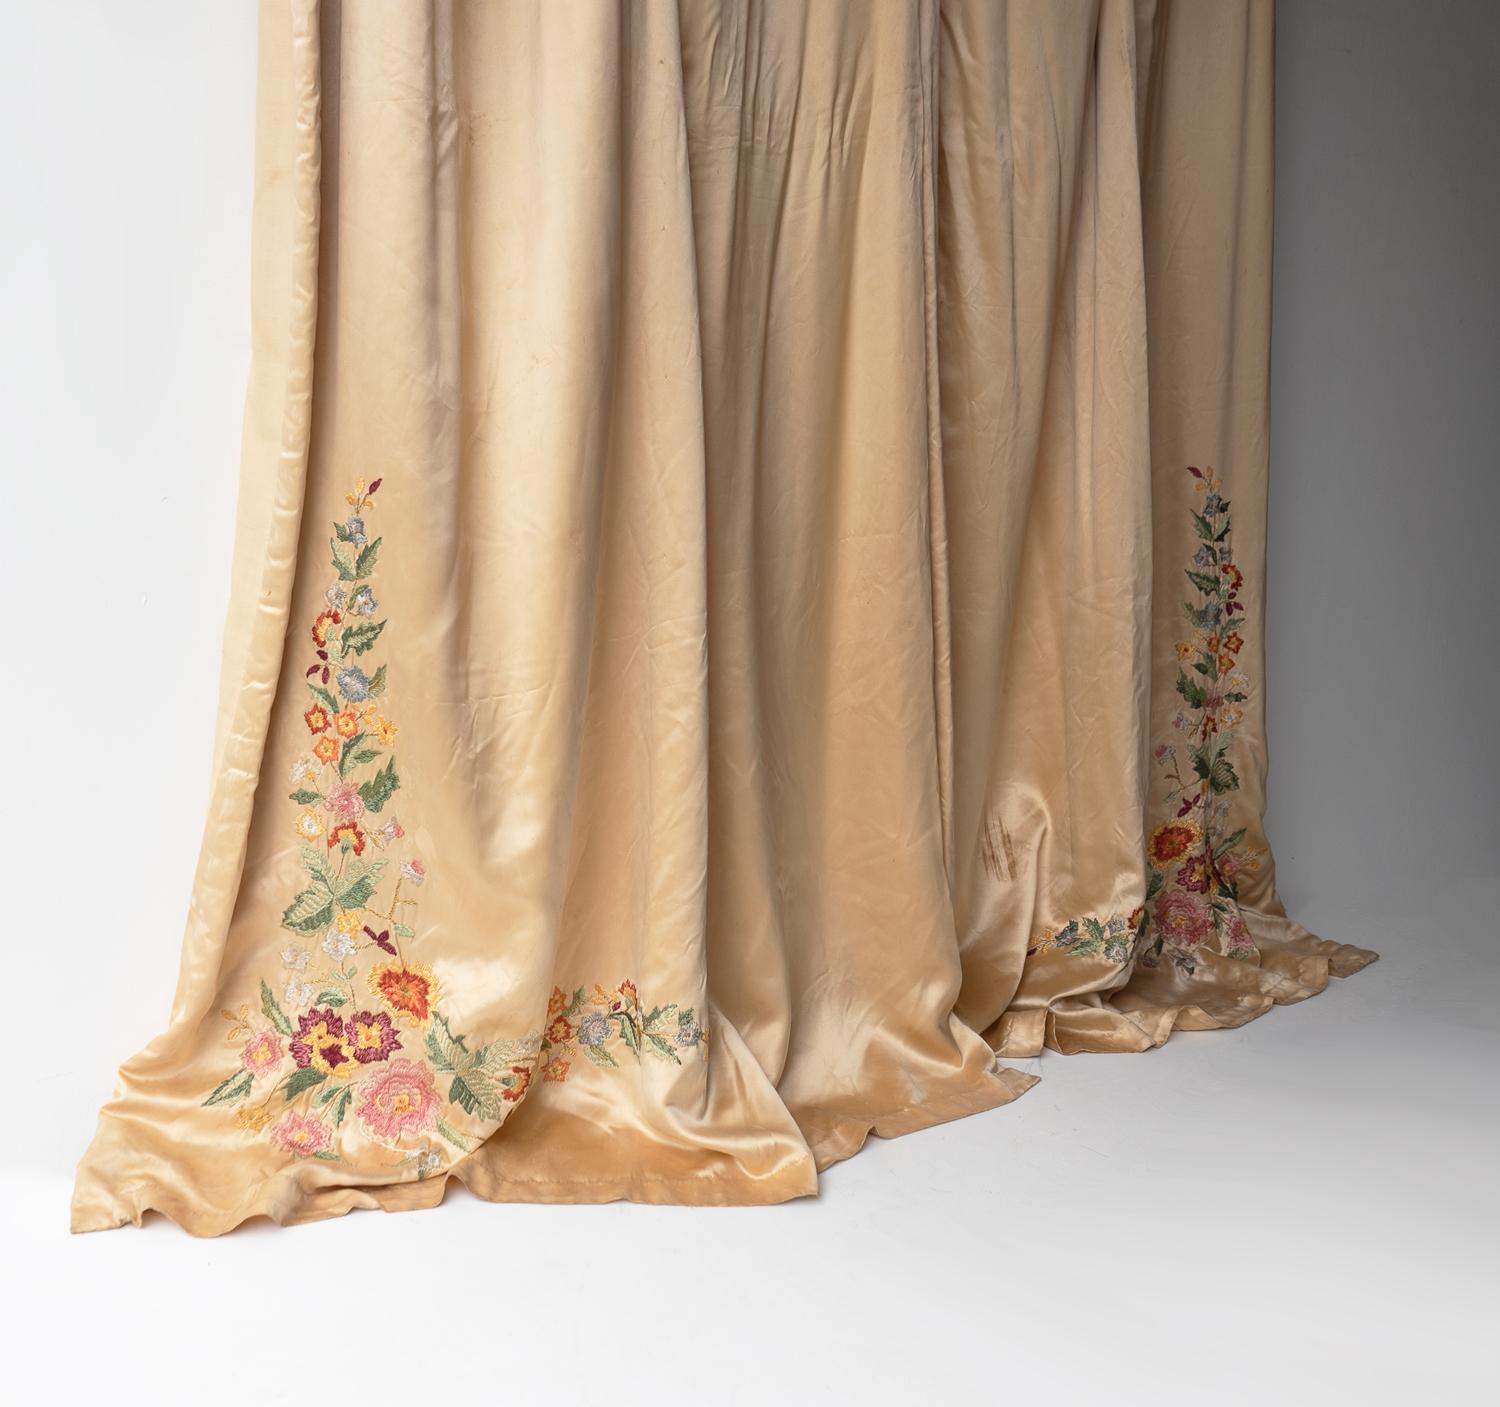 PAIR OF VINTAGE FLORAL EMBROIDERED LINED PEACH SILK CURTAINS WITH PELMET, 1920s 1